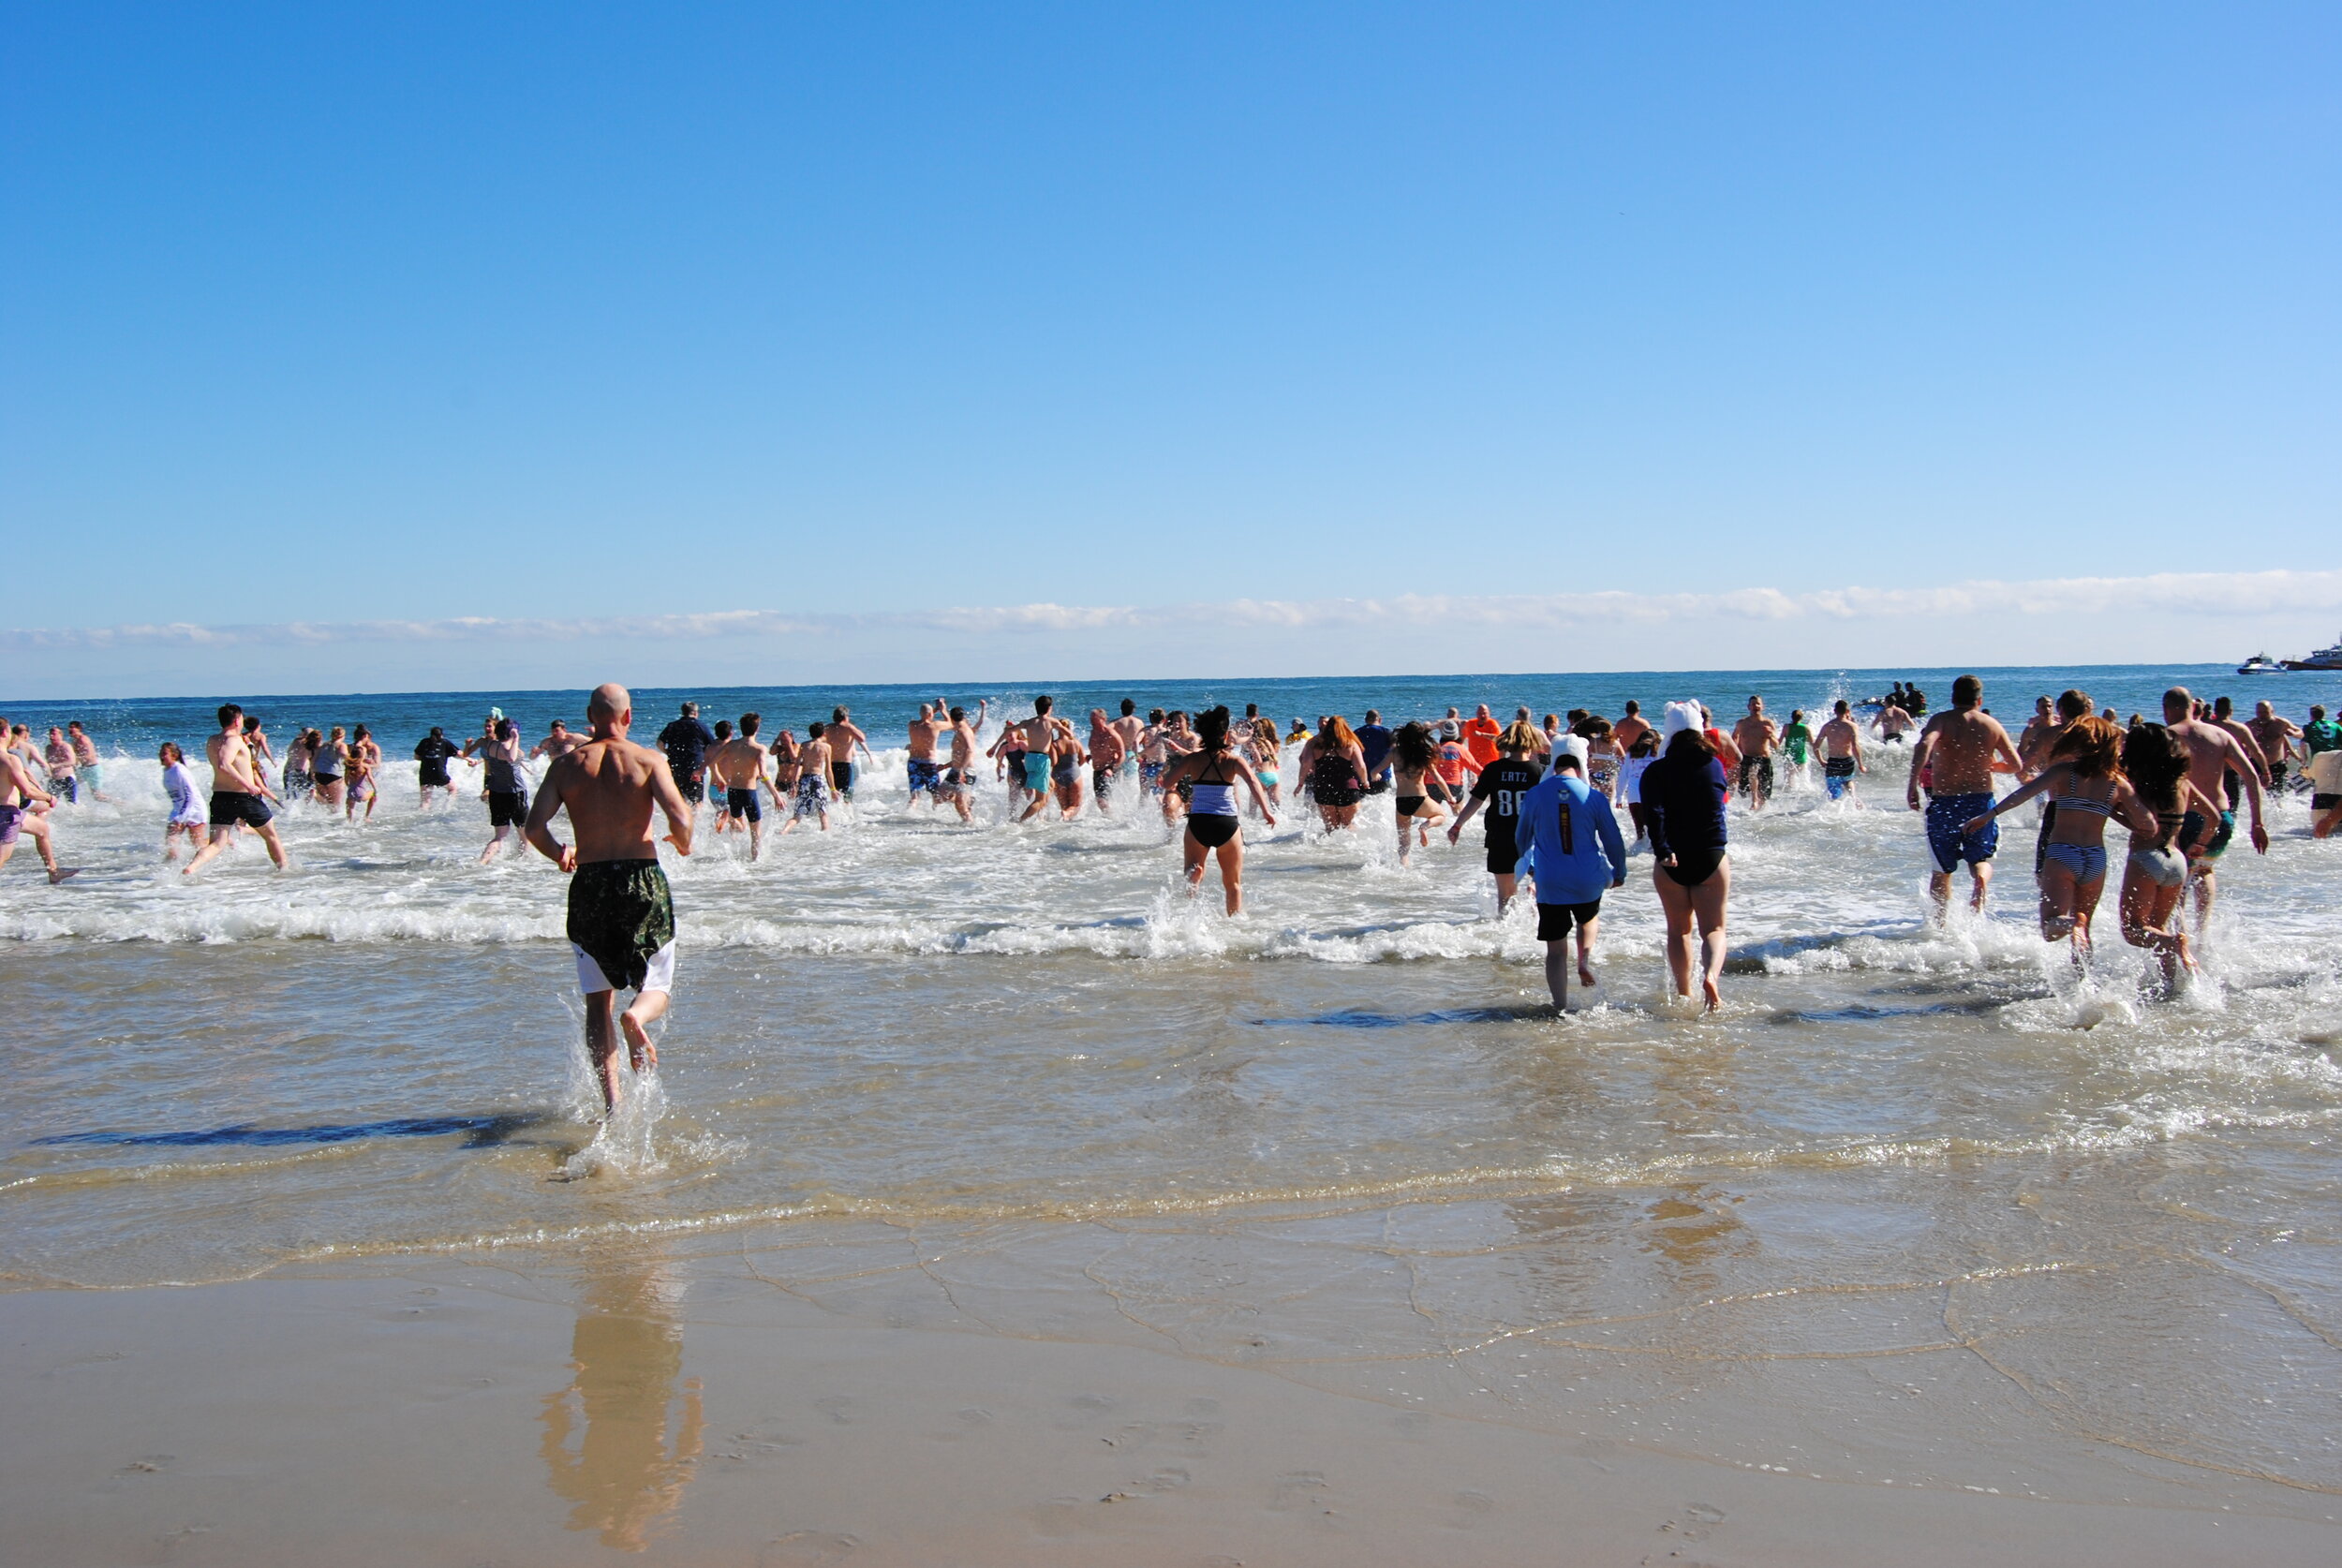 Plungers take to the water.